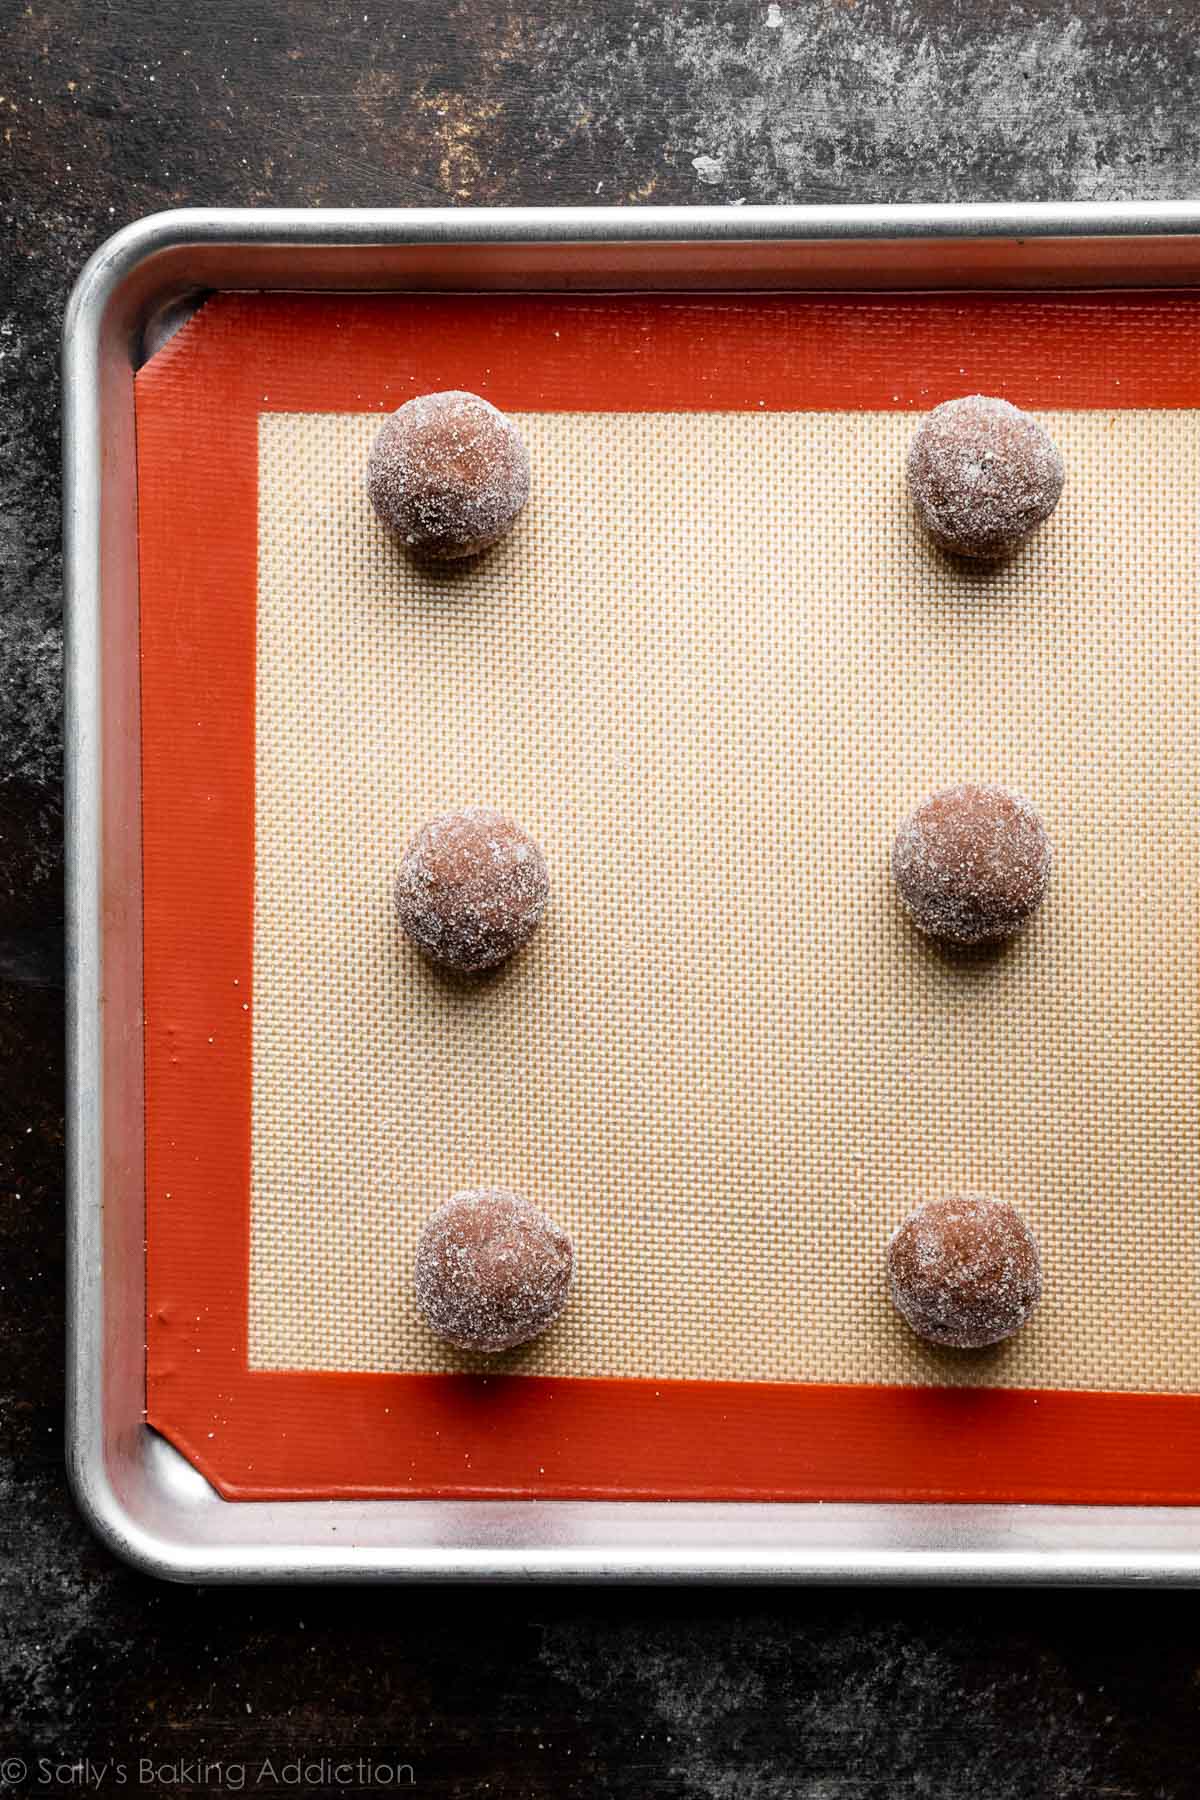 6 cookie dough balls arranged on silicone baking mat-lined baking sheet.